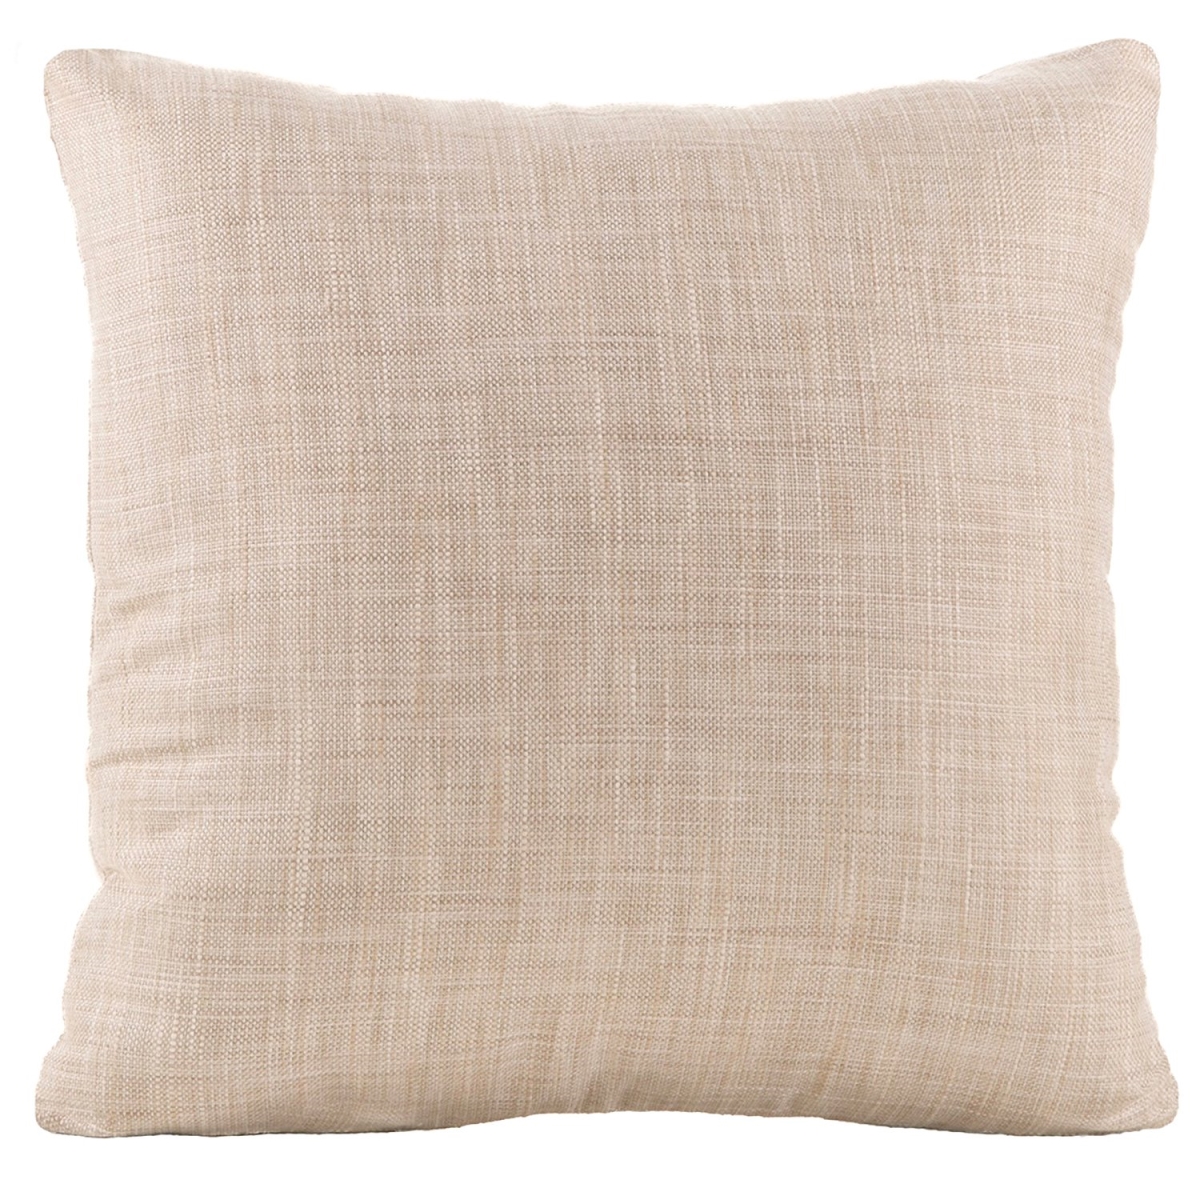 18 X 18 In. Natural Wovens Pillow Cover, Natural